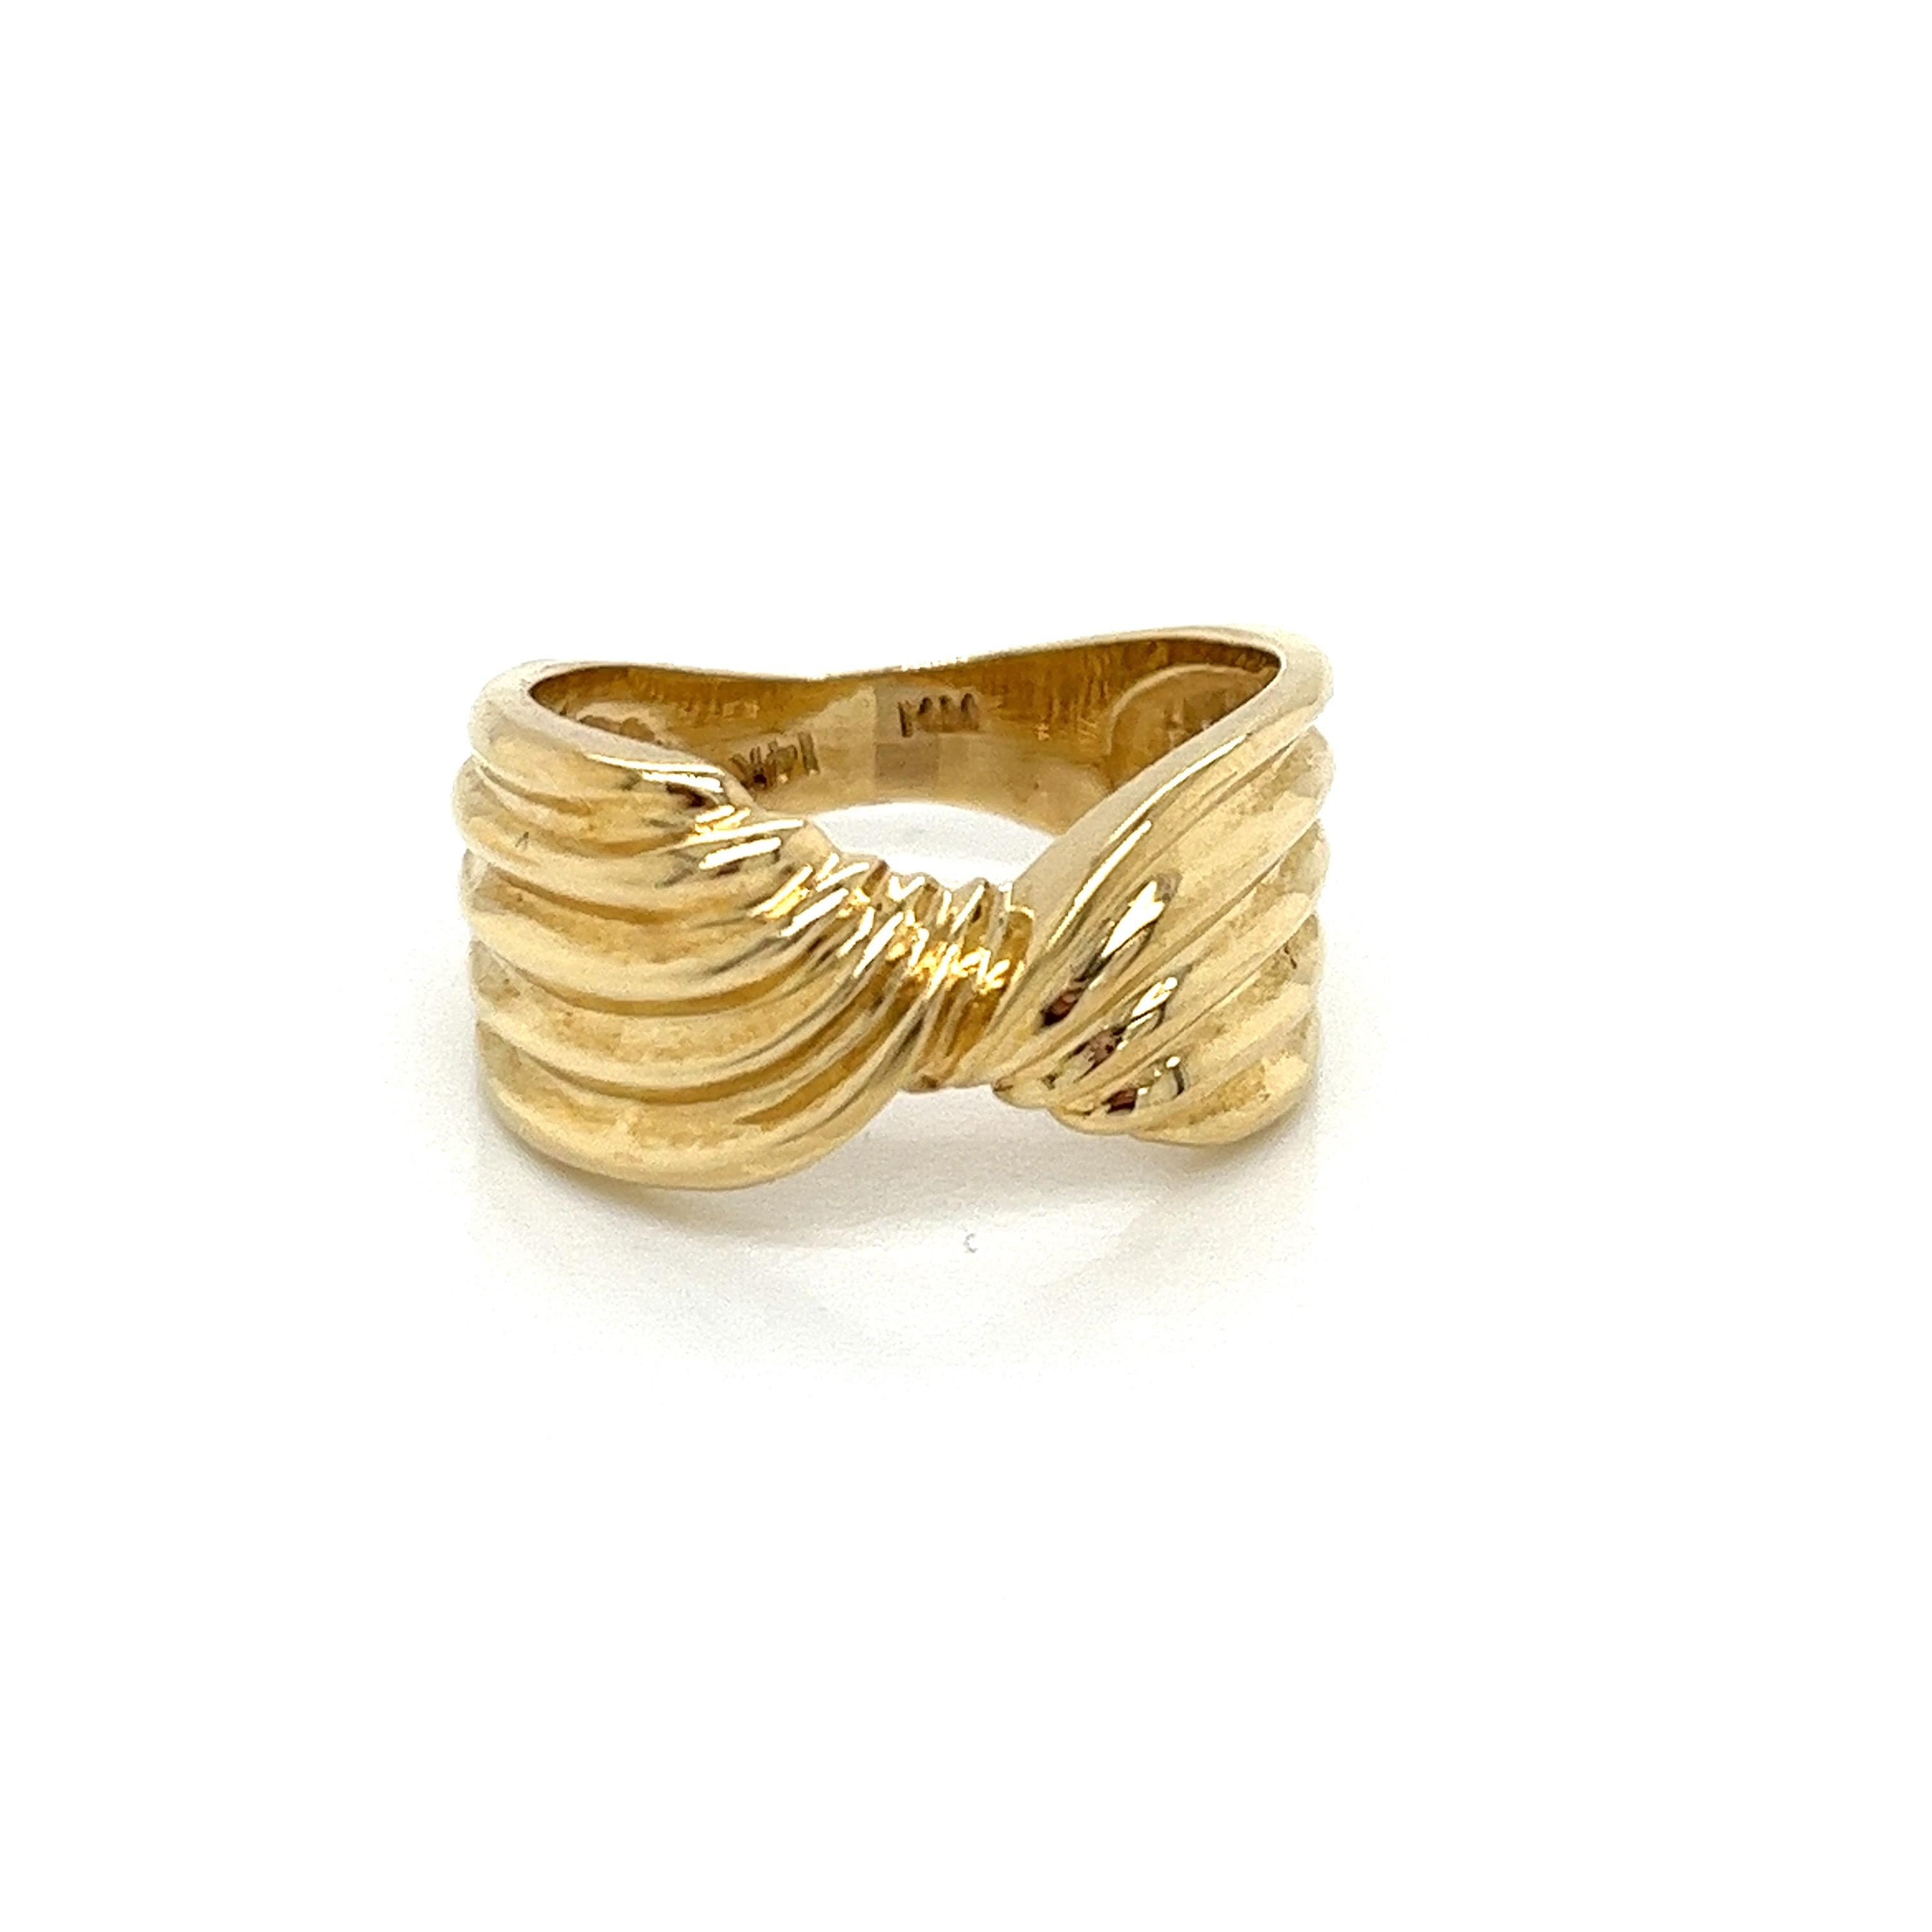 Vintage 1980's 14k Yellow Gold Twist Ribbon Design Statement Ring. The width of the ring is 9.8mm and tapers to 3.5mm wide. The finger size is 6 and it can be sized upon request. The ring weighs 5.35g. 